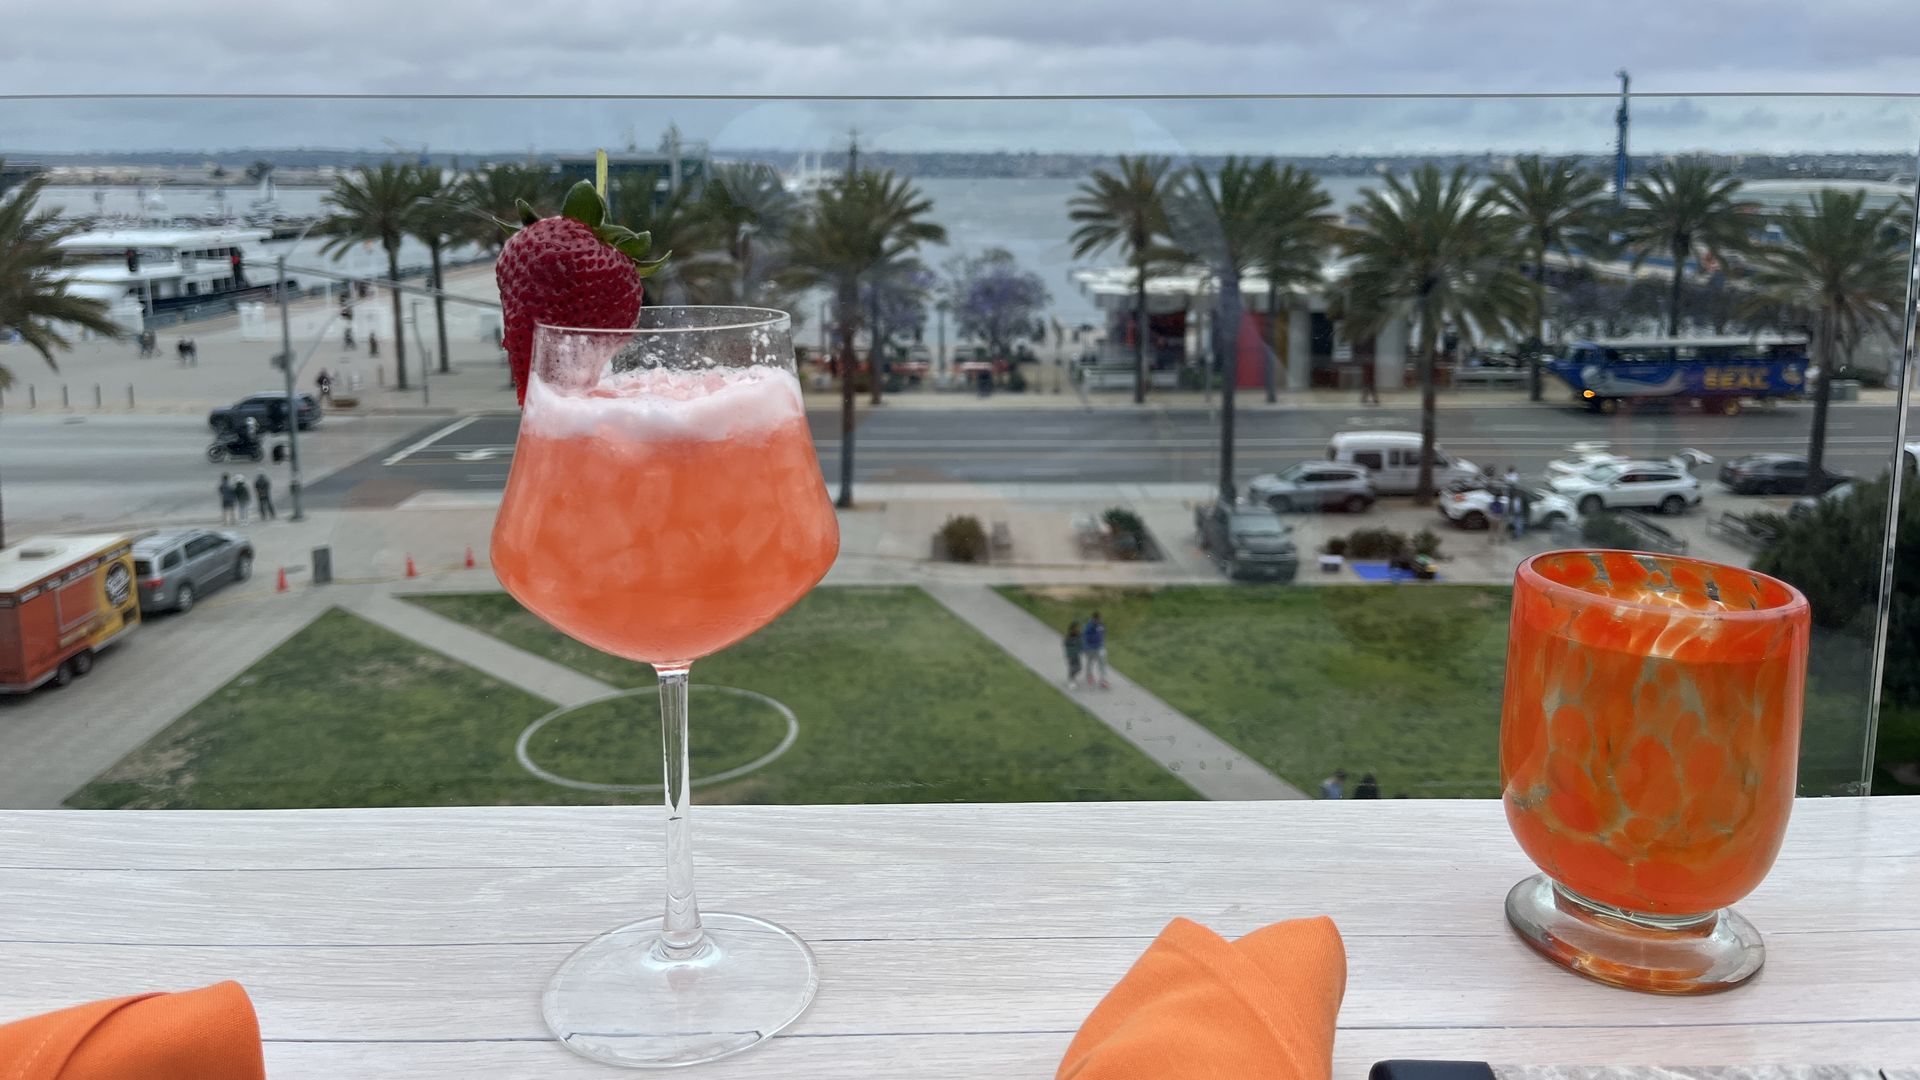 An orange-colored cocktail sits on a ledge at a rooftop bar overlooking a grassy park, palm trees and the San Diego Bay.